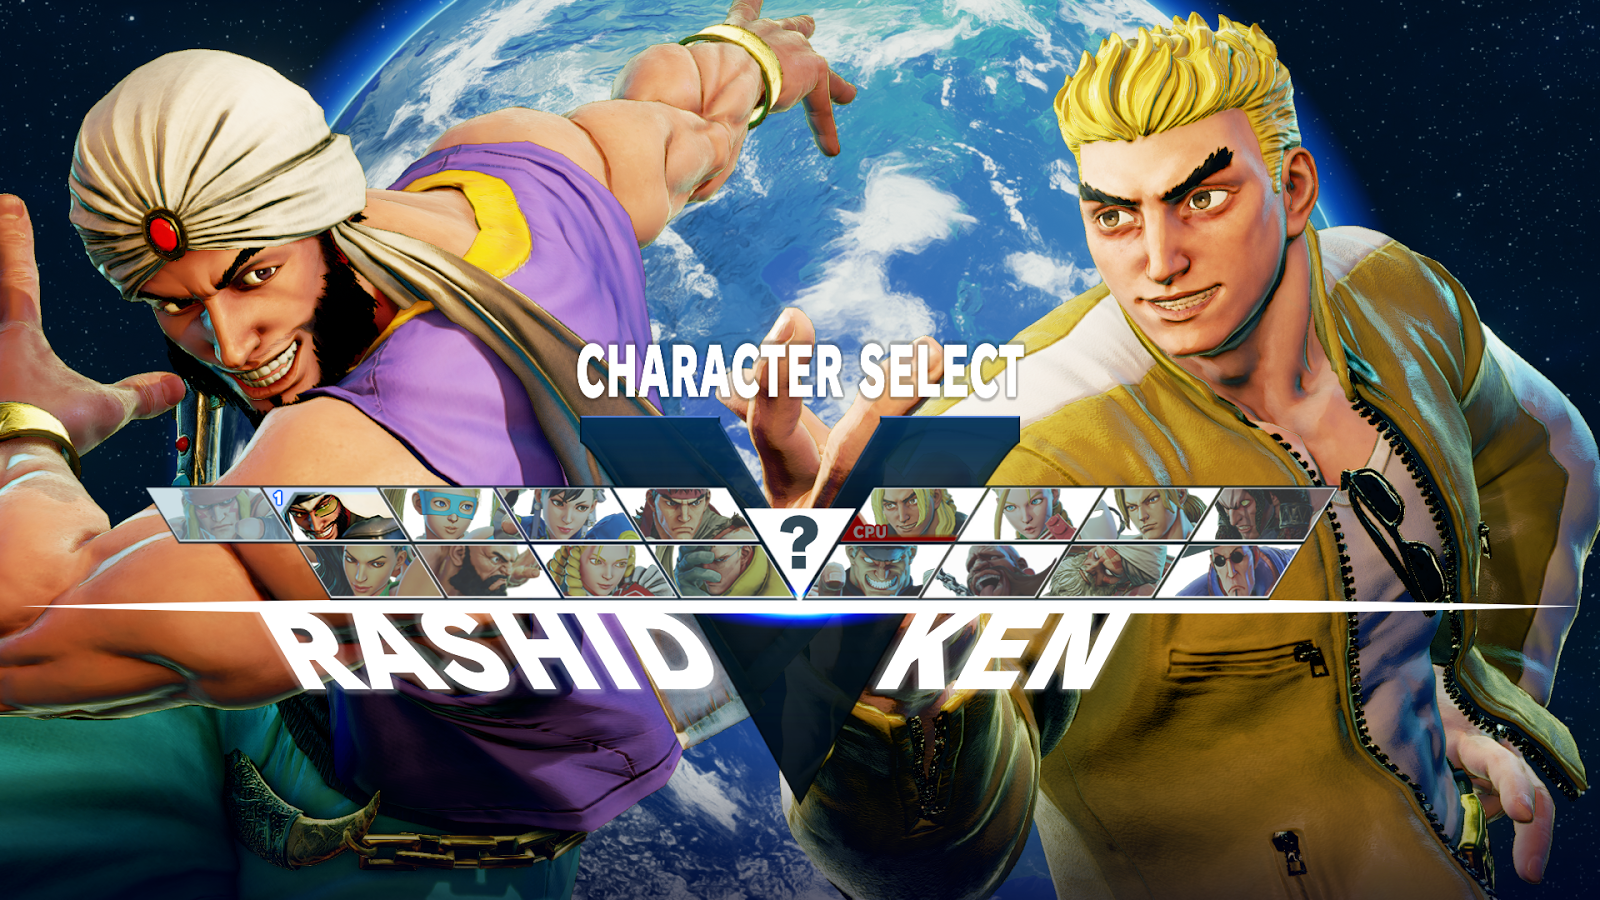 Awful New Look For Ken And Hidden Costumes Discovered In Street Fighter V DLC Update